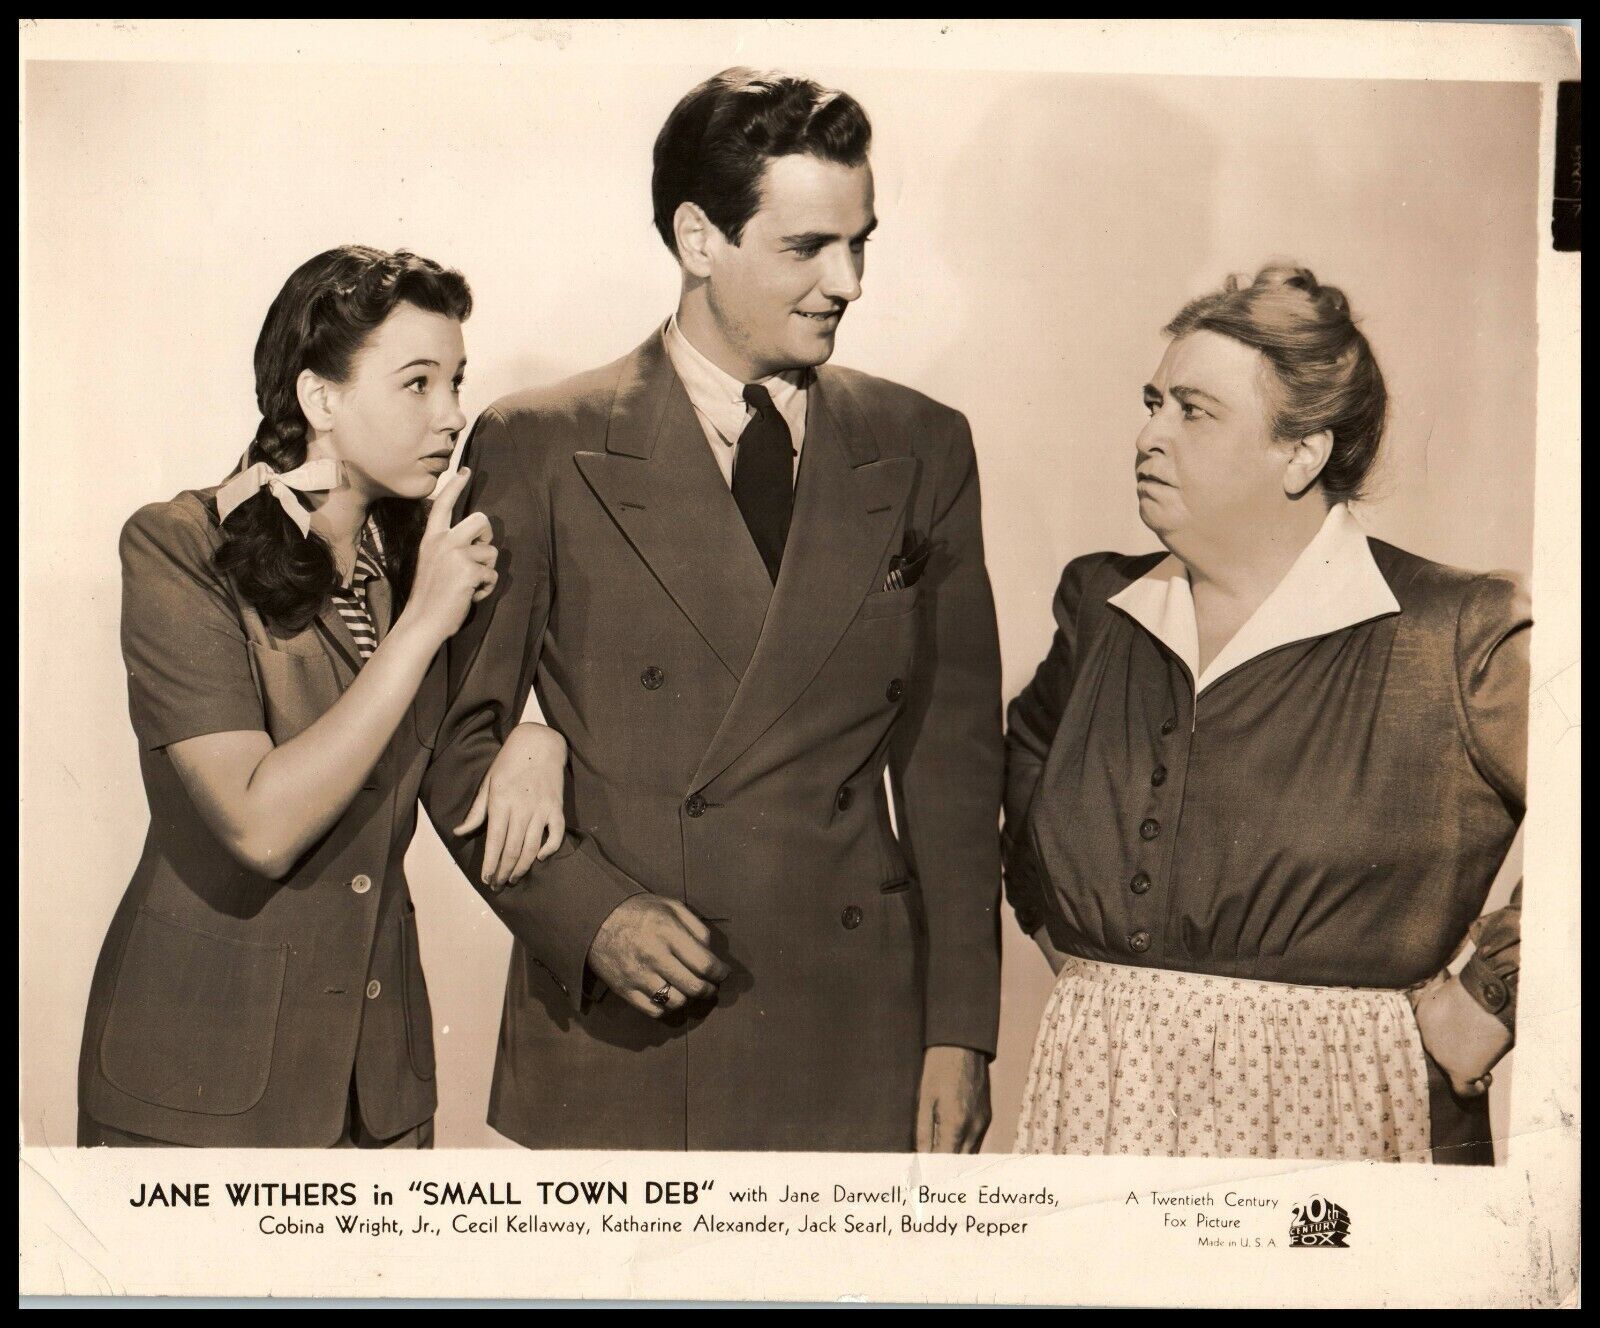 Jane Withers + Bruce Edward + Jane Darwell in Small Town Deb (1942) PHOTO M 90